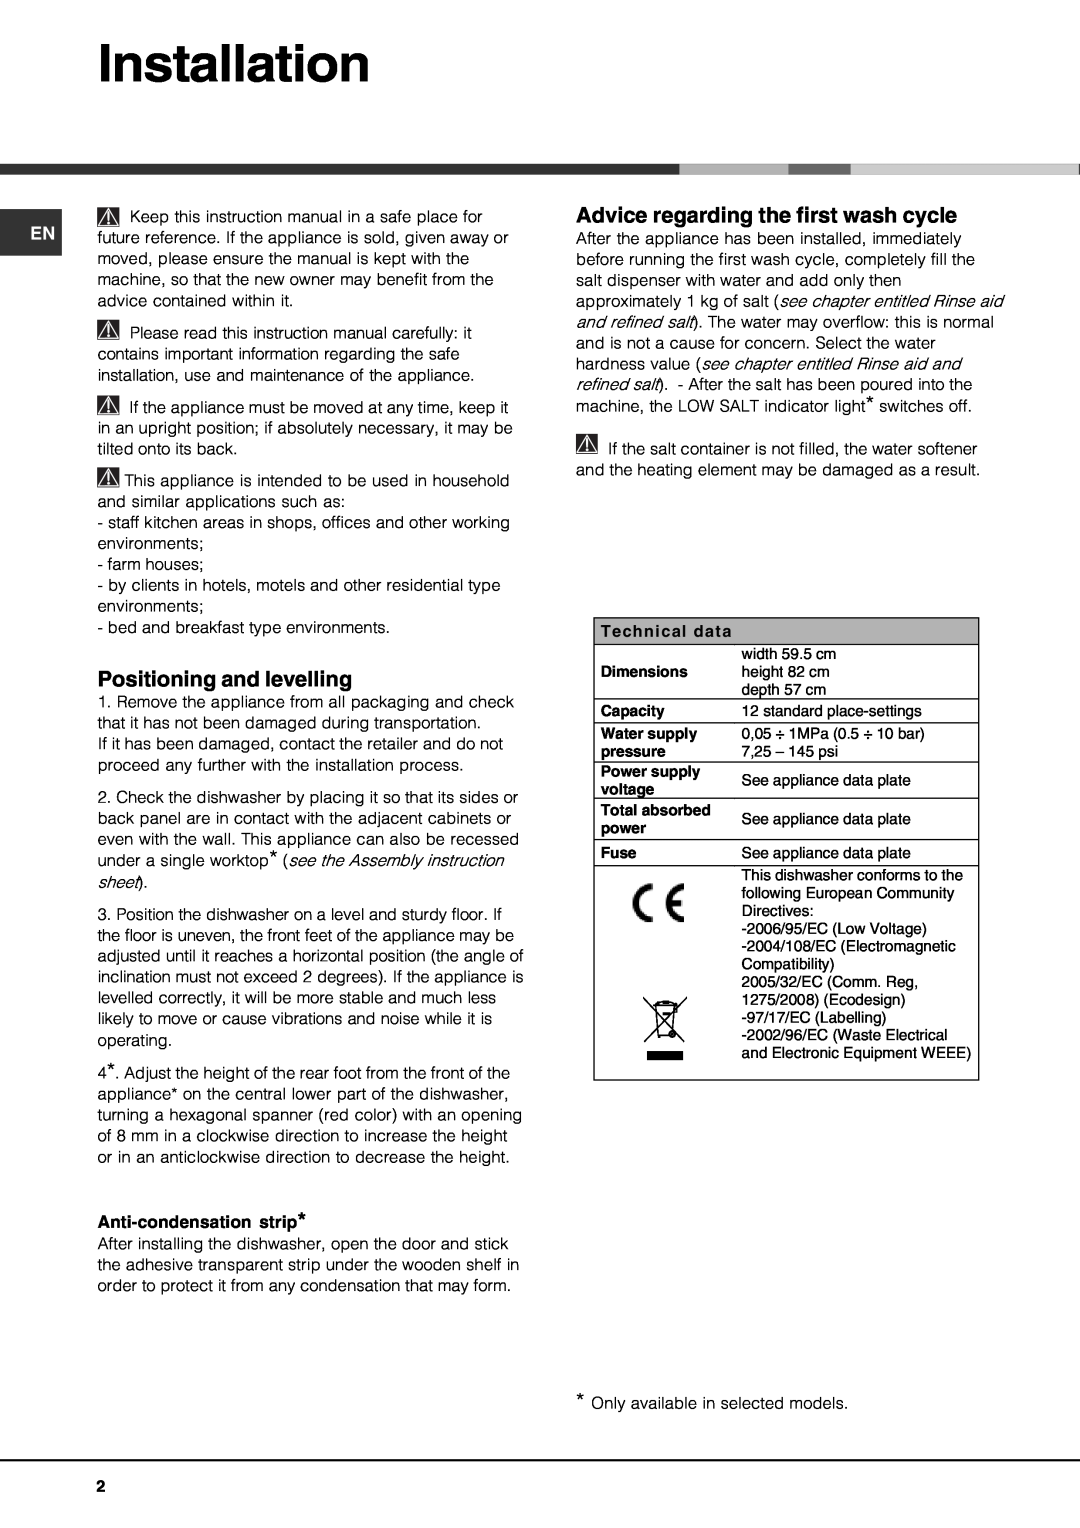 Hotpoint LFT 228 manual Installation, Positioning and levelling, Advice regarding the first wash cycle, Technical data 